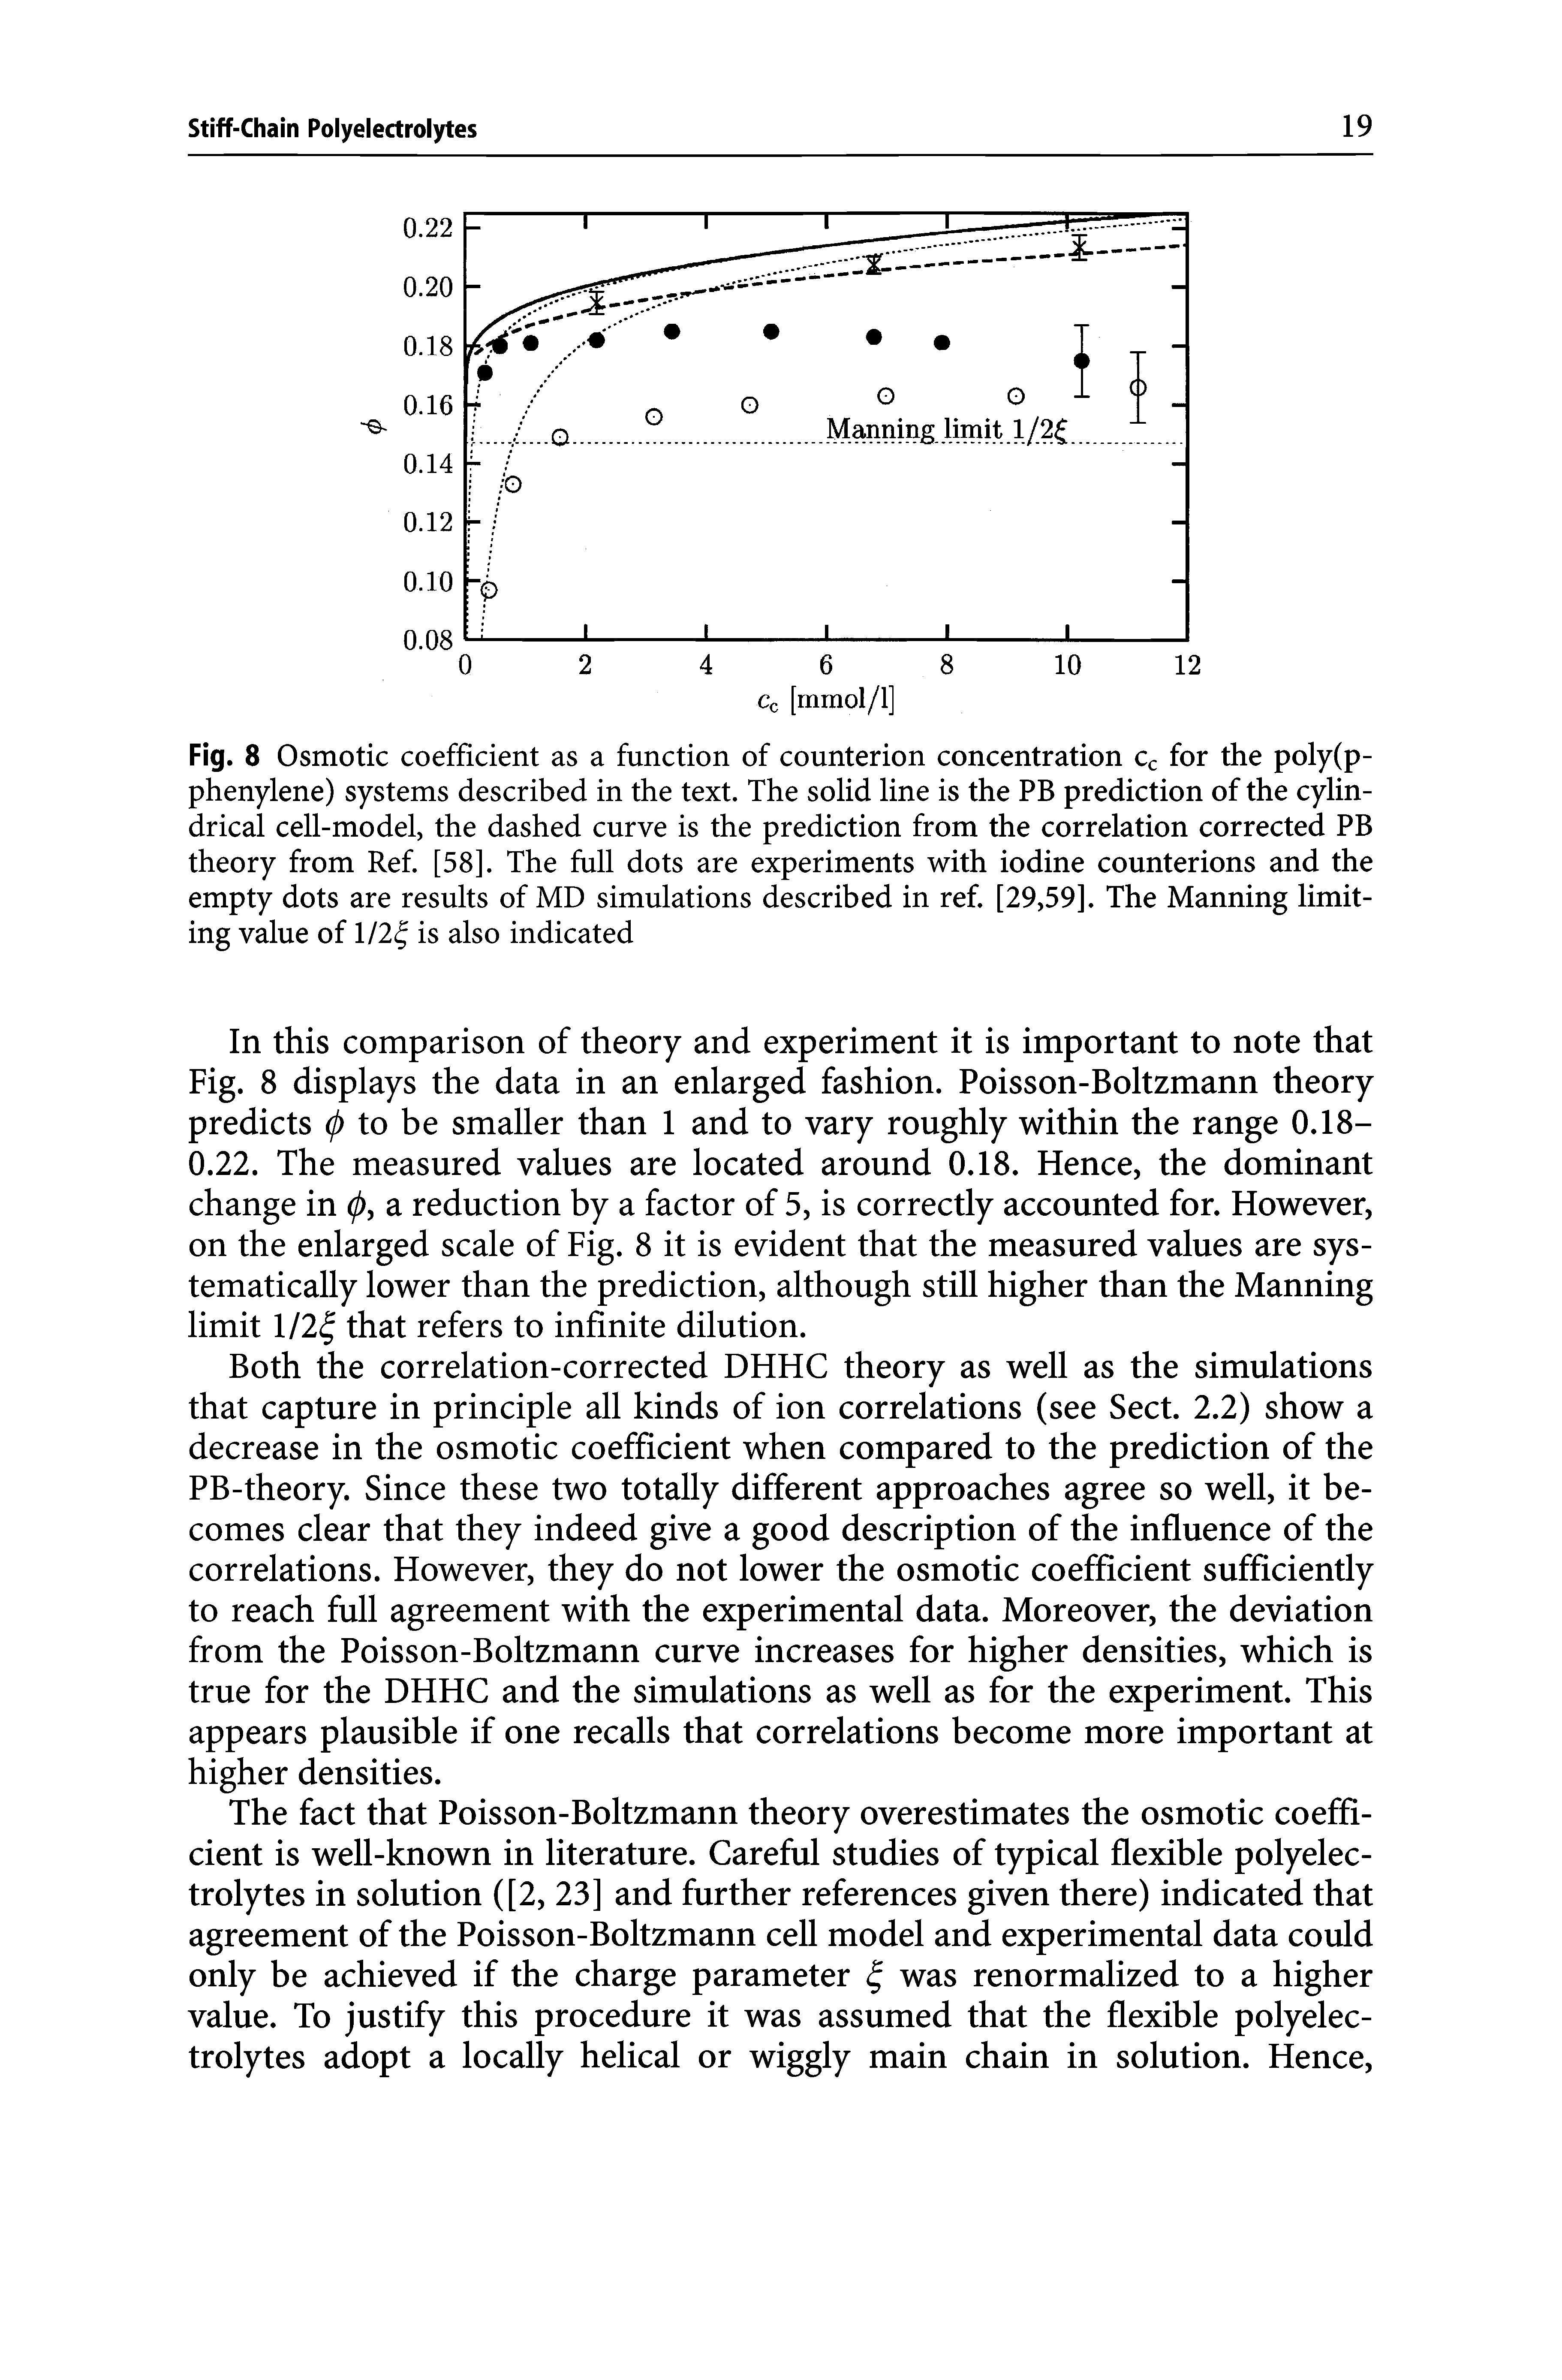 Fig. 8 Osmotic coefficient as a function of counterion concentration cc for the poly(p-phenylene) systems described in the text. The solid line is the PB prediction of the cylindrical cell-model, the dashed curve is the prediction from the correlation corrected PB theory from Ref. [58]. The full dots are experiments with iodine counterions and the empty dots are results of MD simulations described in ref. [29,59]. The Manning limiting value of l/2 is also indicated...